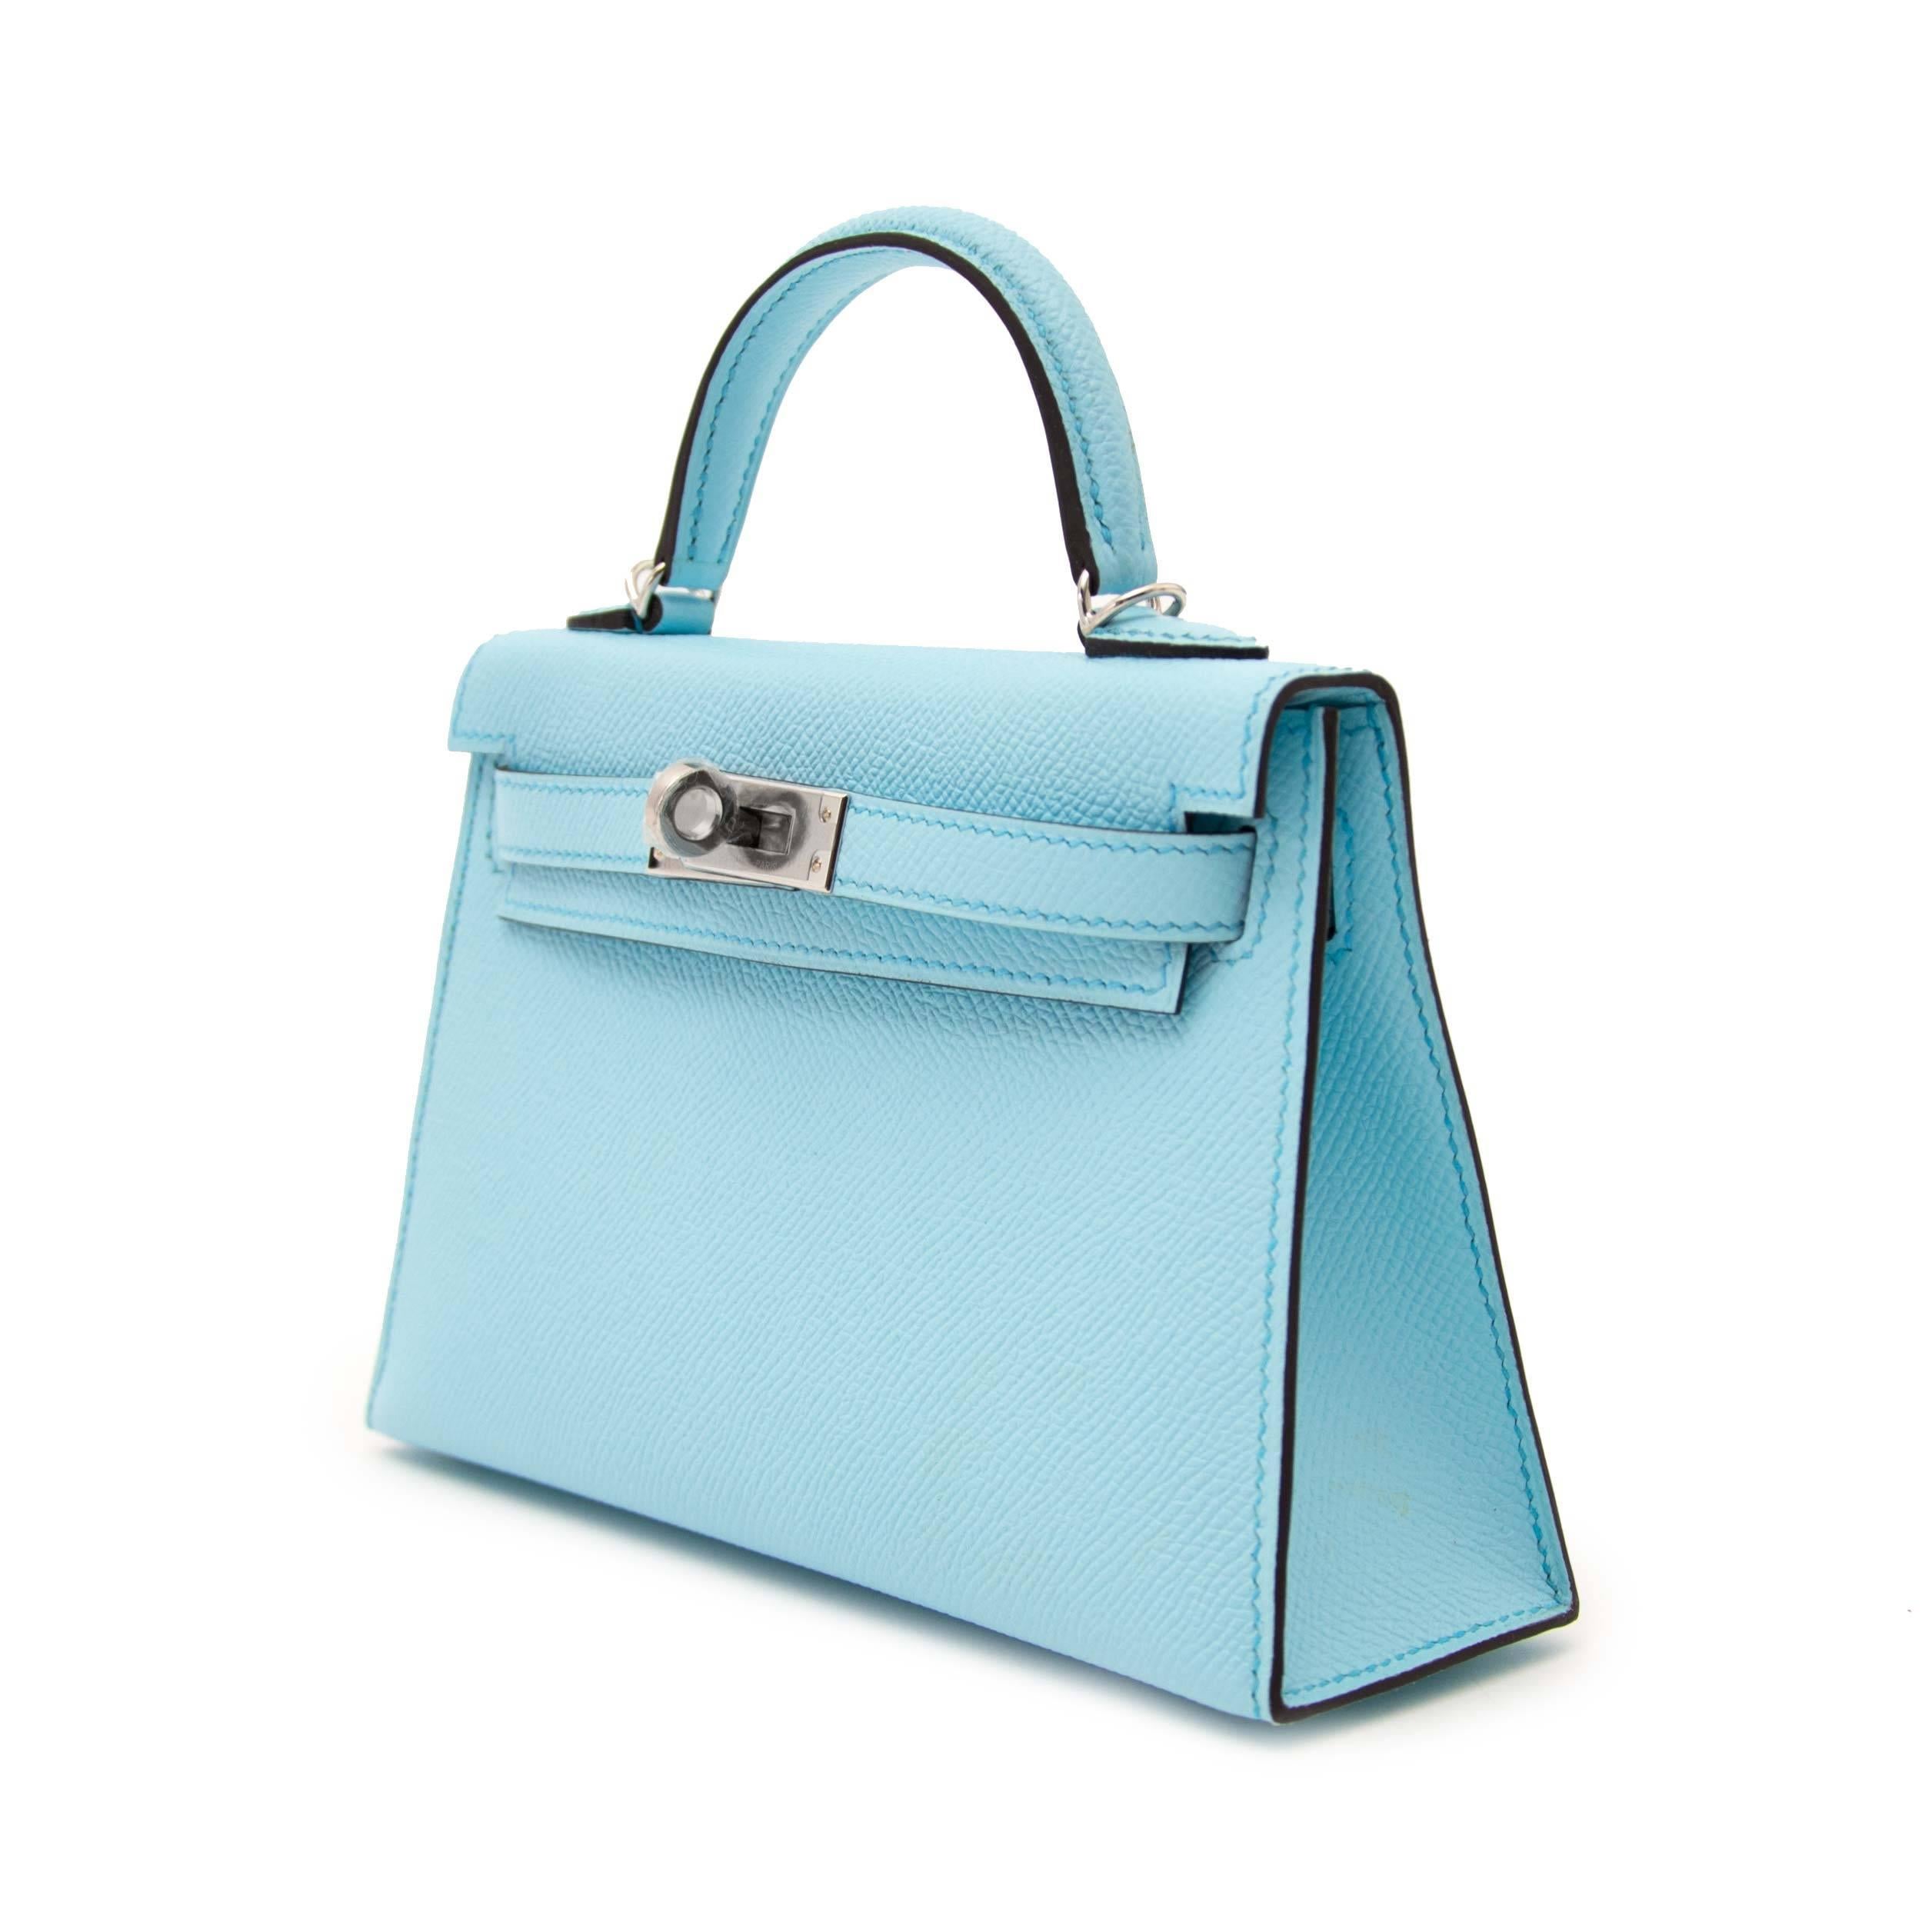 The talk about town Hermes hard to find Kelly Mini in beautiful soft light blue zephyr epsom. 
Divine size for day to evening. Tonal stitching, a front toggle closure, a single rolled handle and an optional shoulder strap.
The interior is lined with